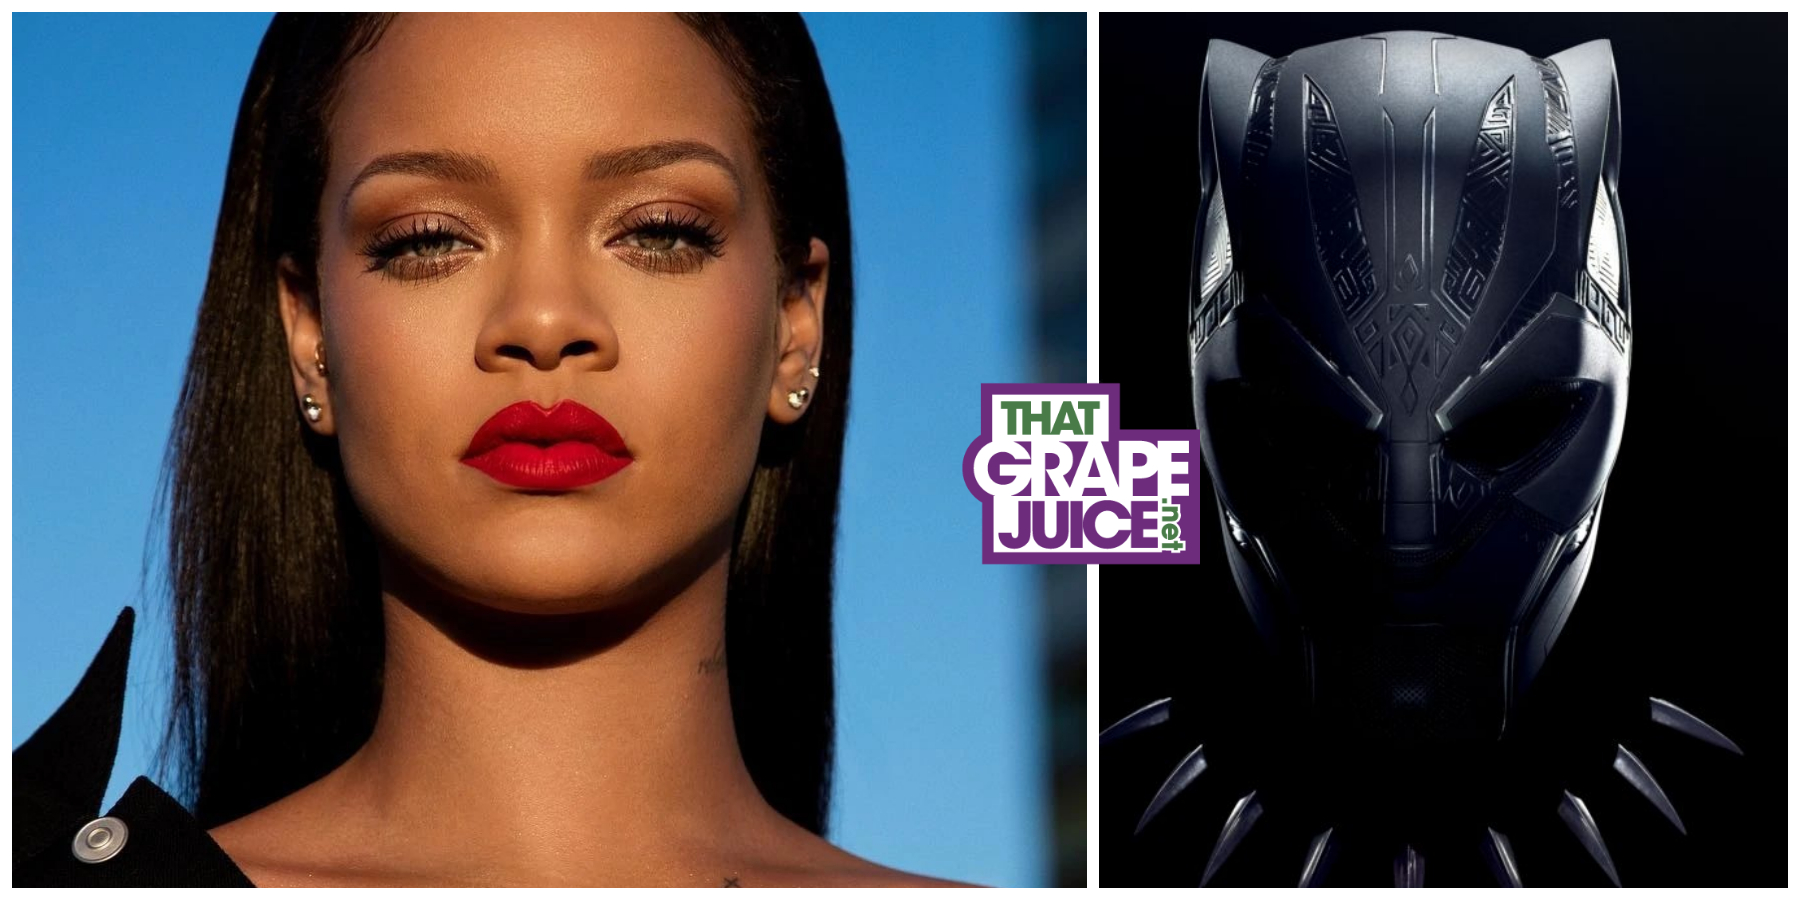 Marvel Teases New Rihanna Music for ‘Black Panther 2’ Soundtrack Will Drop THIS WEEK